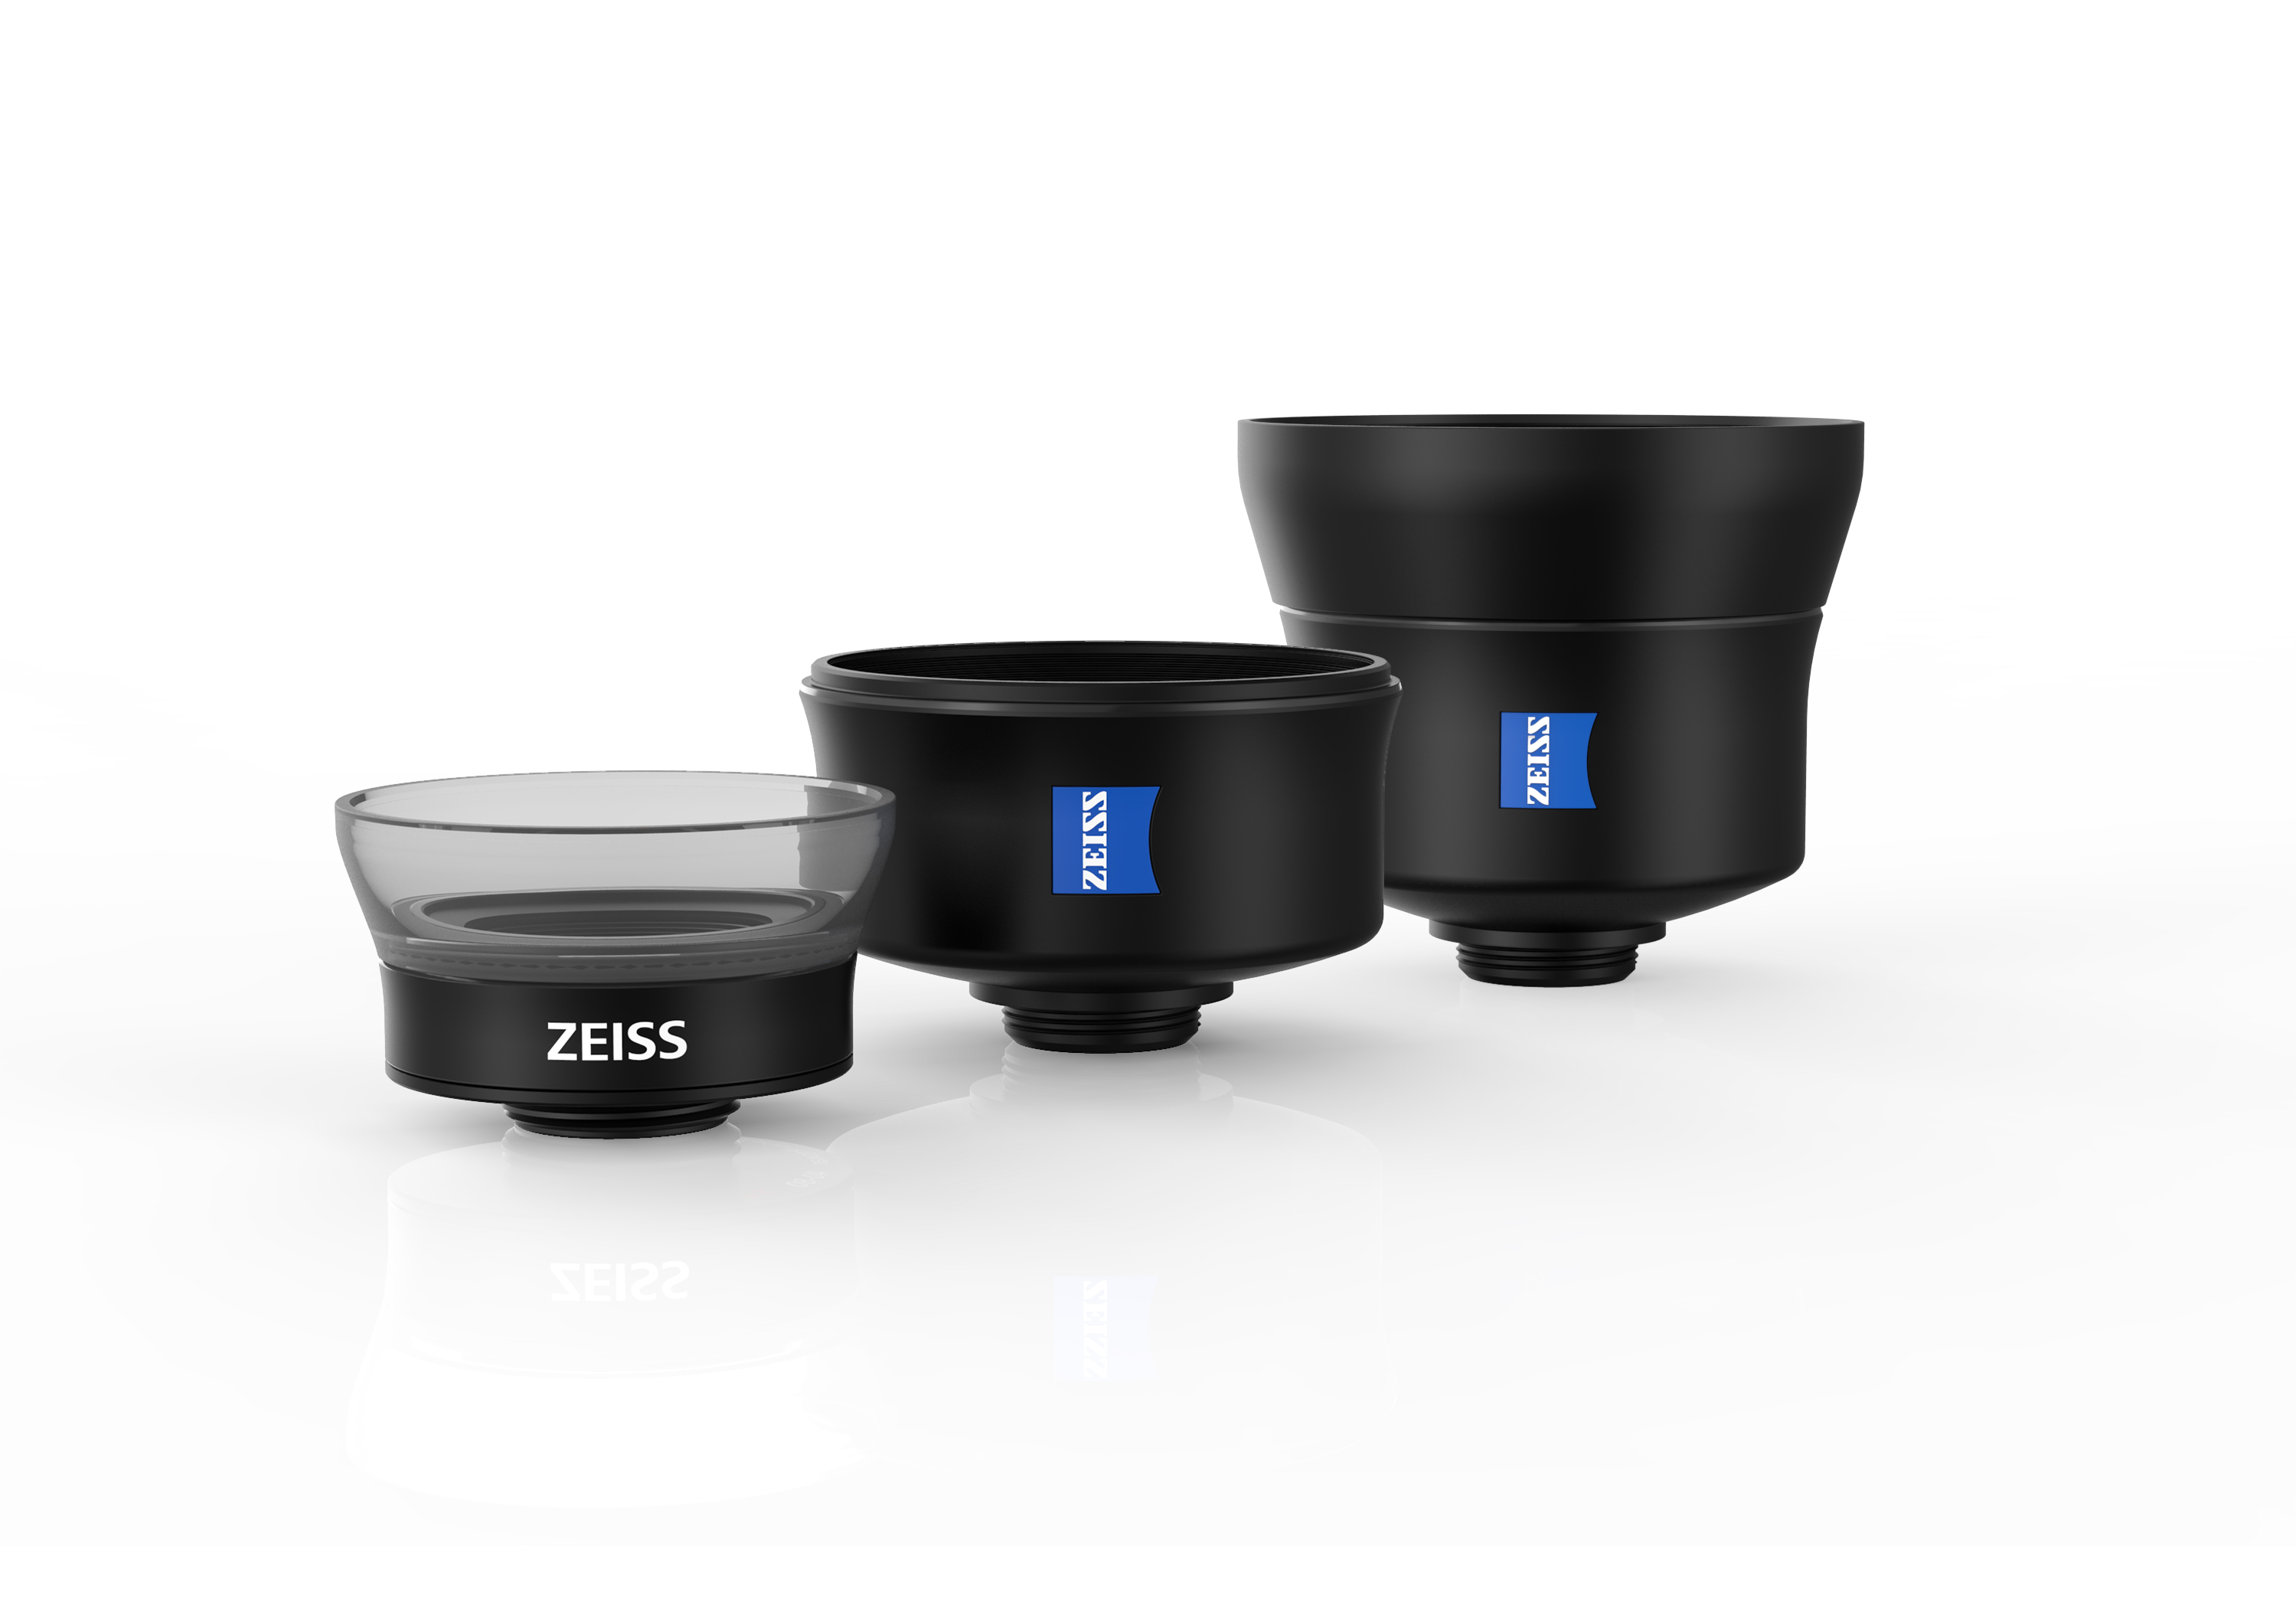 Zeiss mobile phone lens set